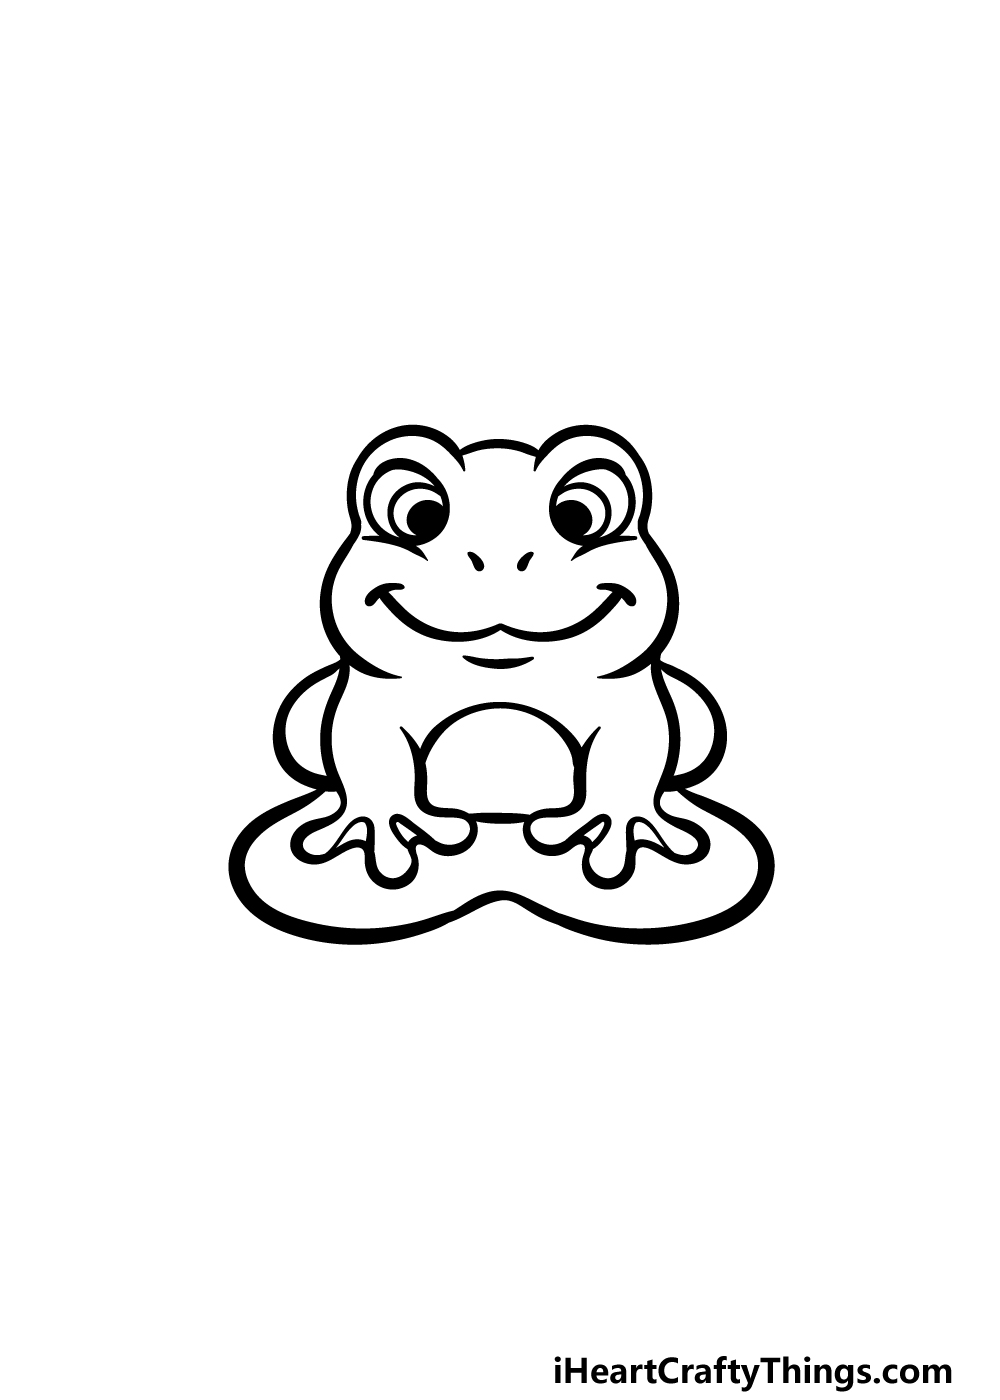 Cartoon Frog Drawing - How To Draw A Cartoon Frog Step By Step